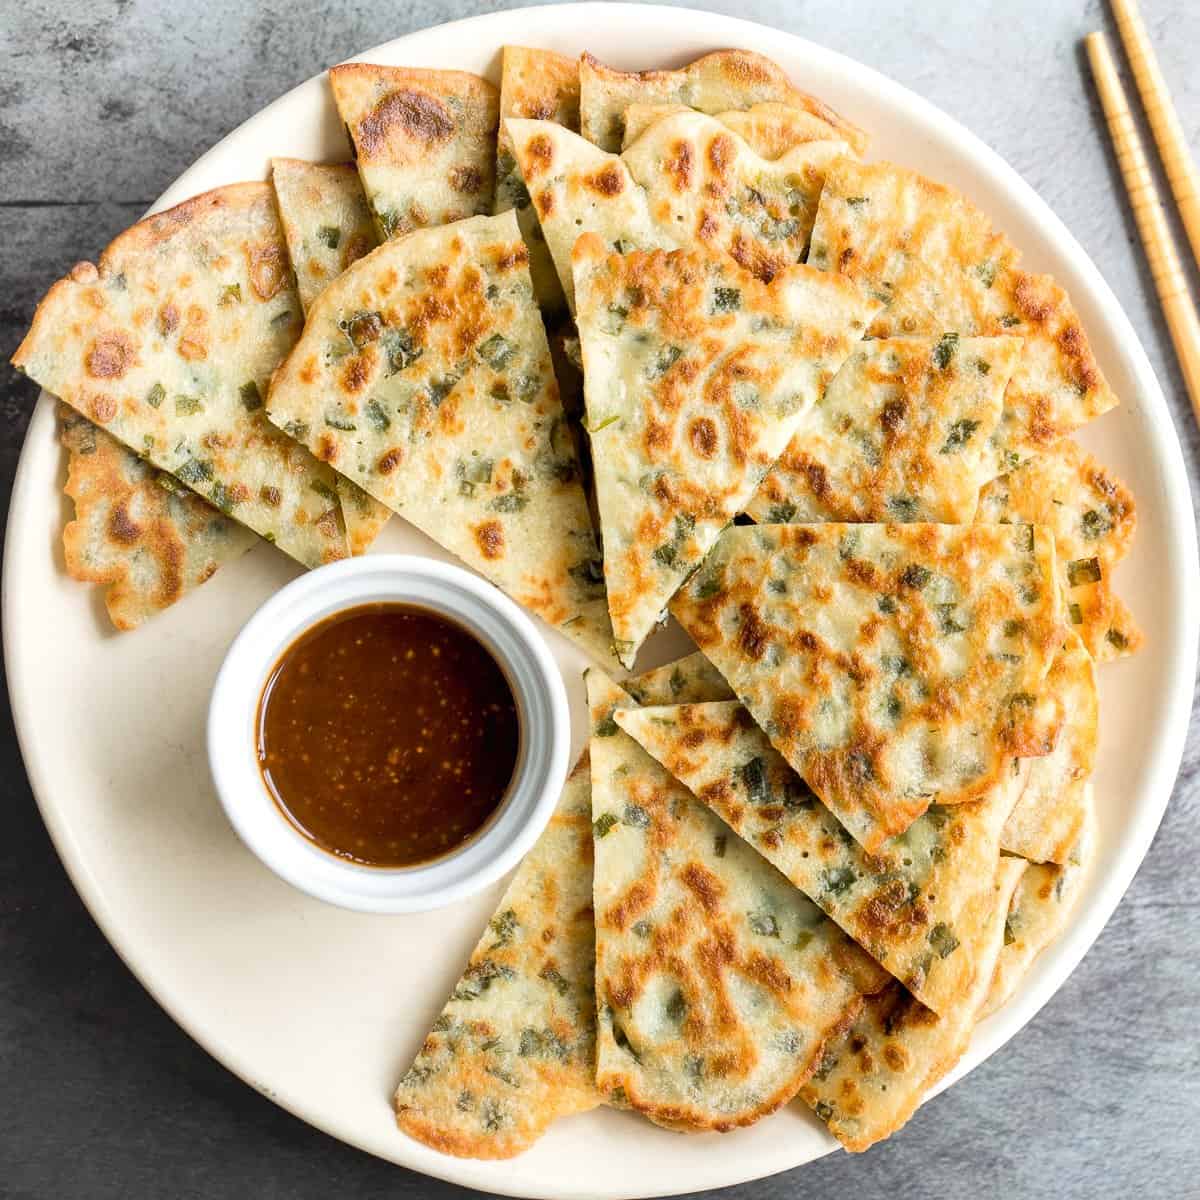 Chinese pancakes with dipping sauce on a plate.